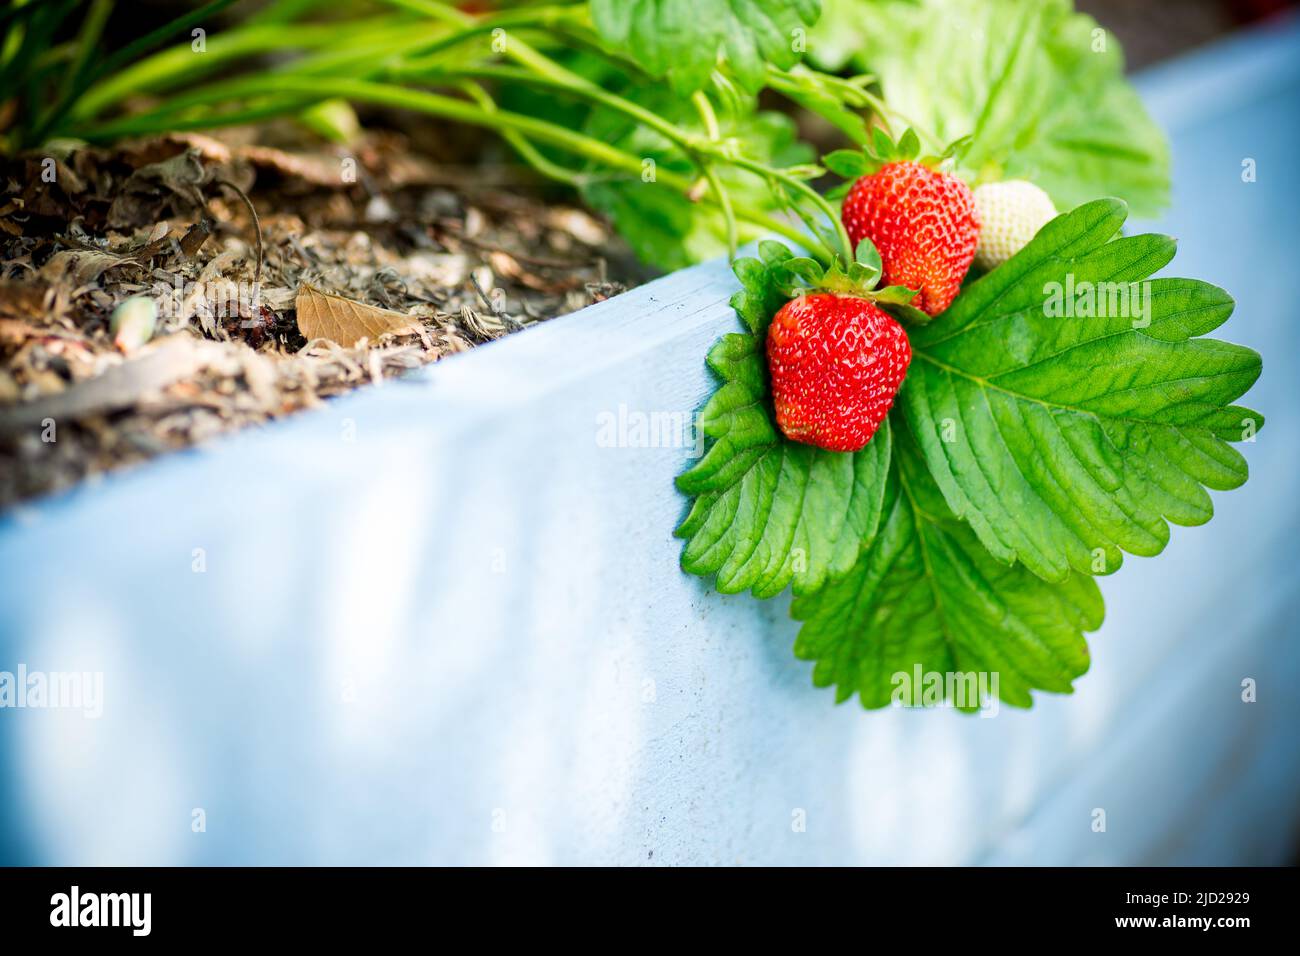 Ripe red strawberries grow on a wooden garden bed outdoors Stock Photo